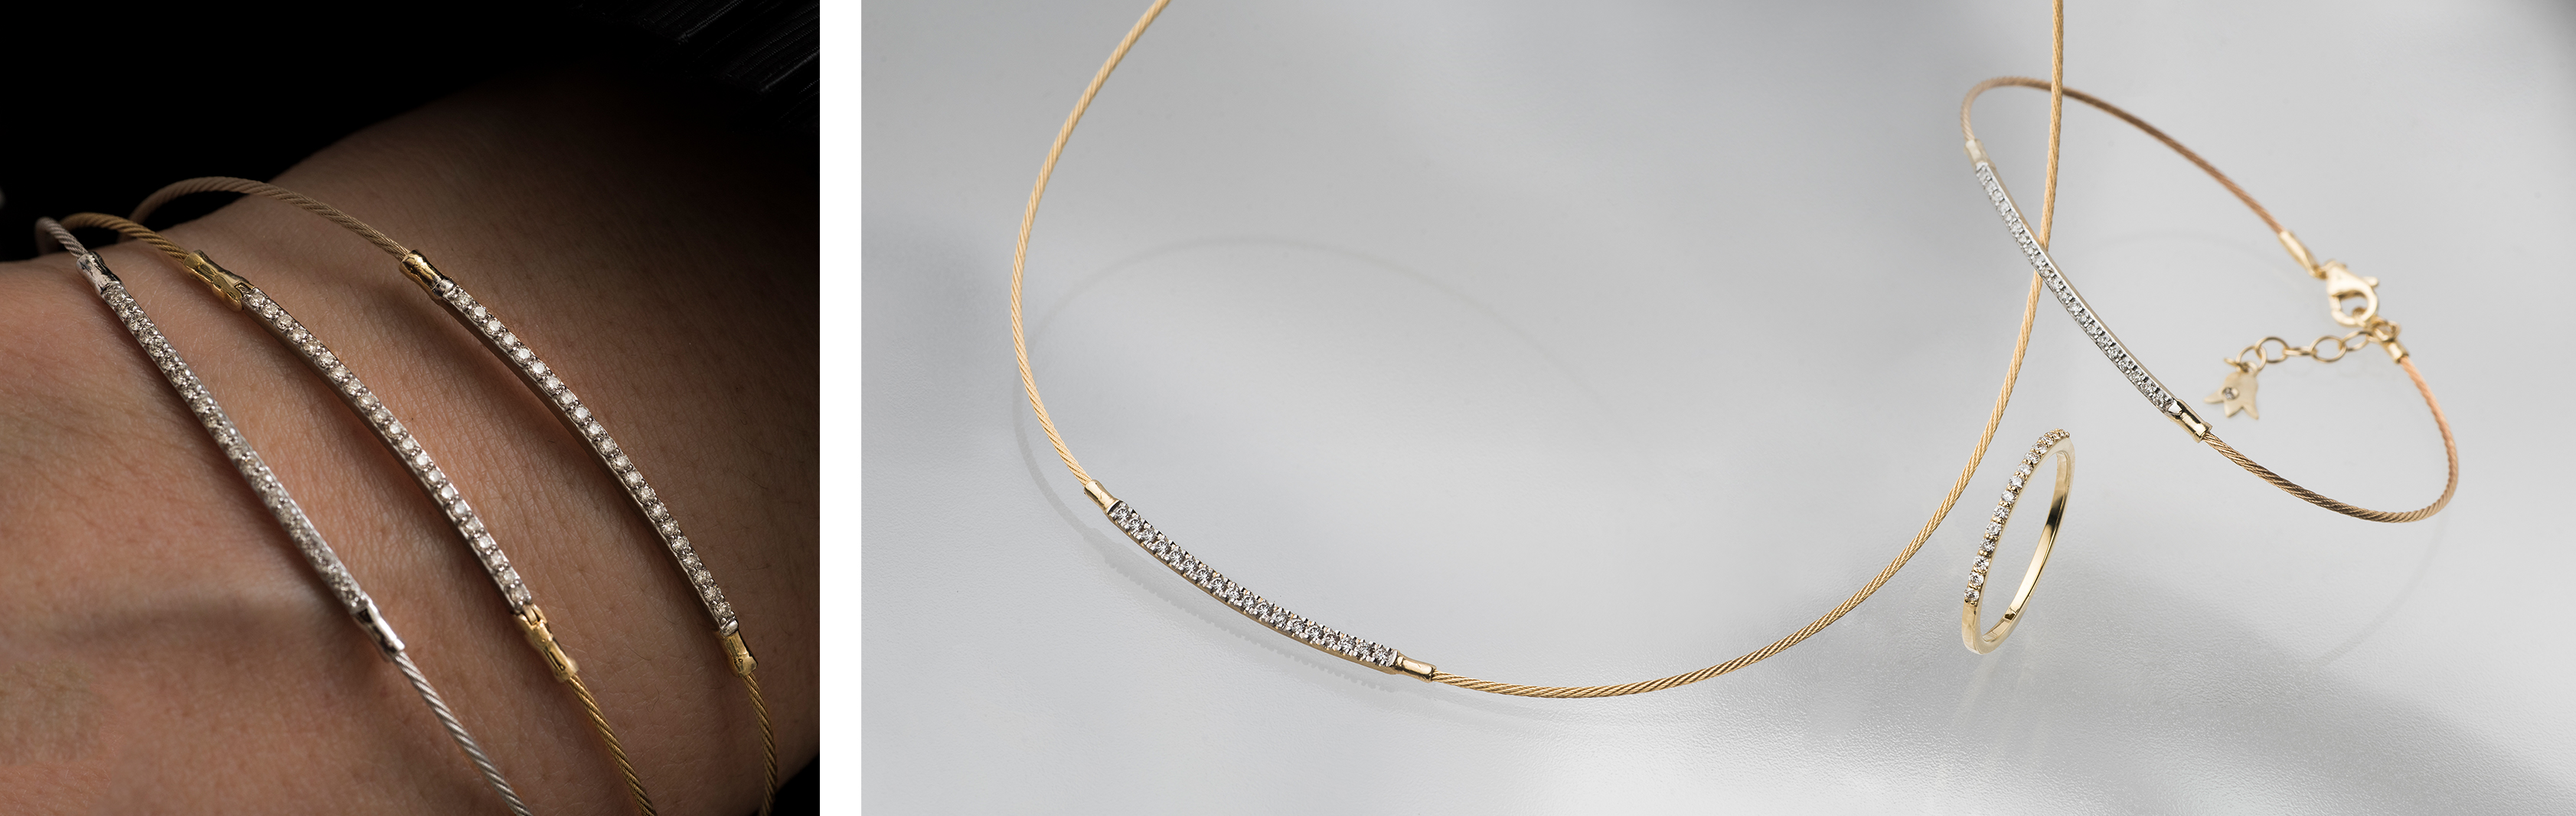 Simple Elegance Collection | 14K Gold and Diamond Jewelry